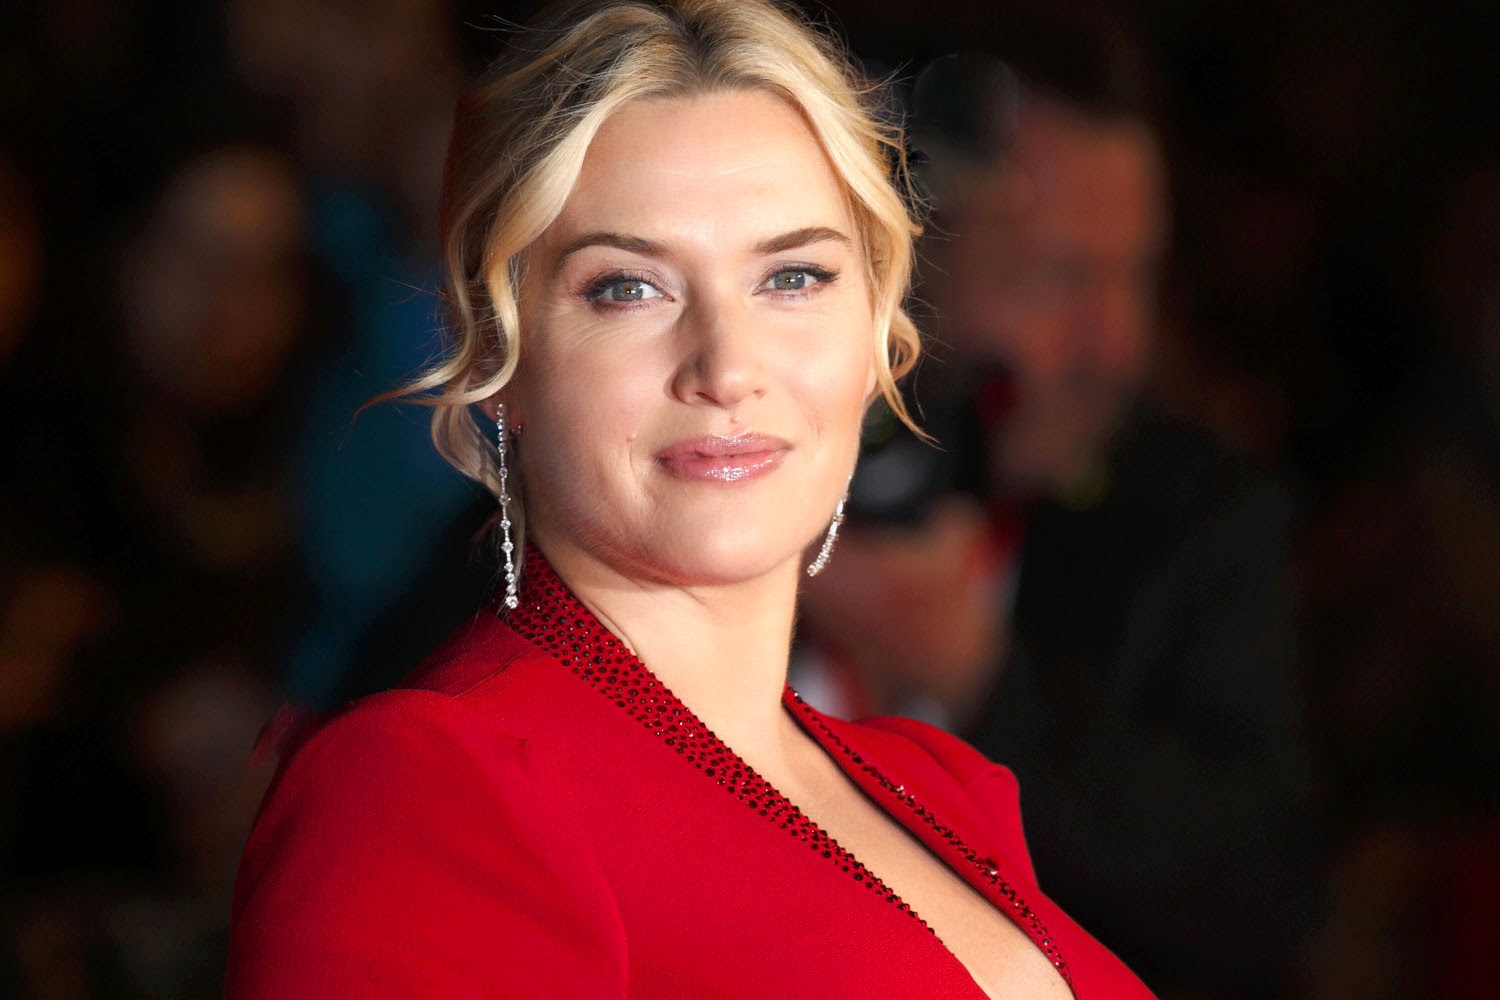 Kate Winslet New Hd Wallpapers 2014 | World HD Wallpapers